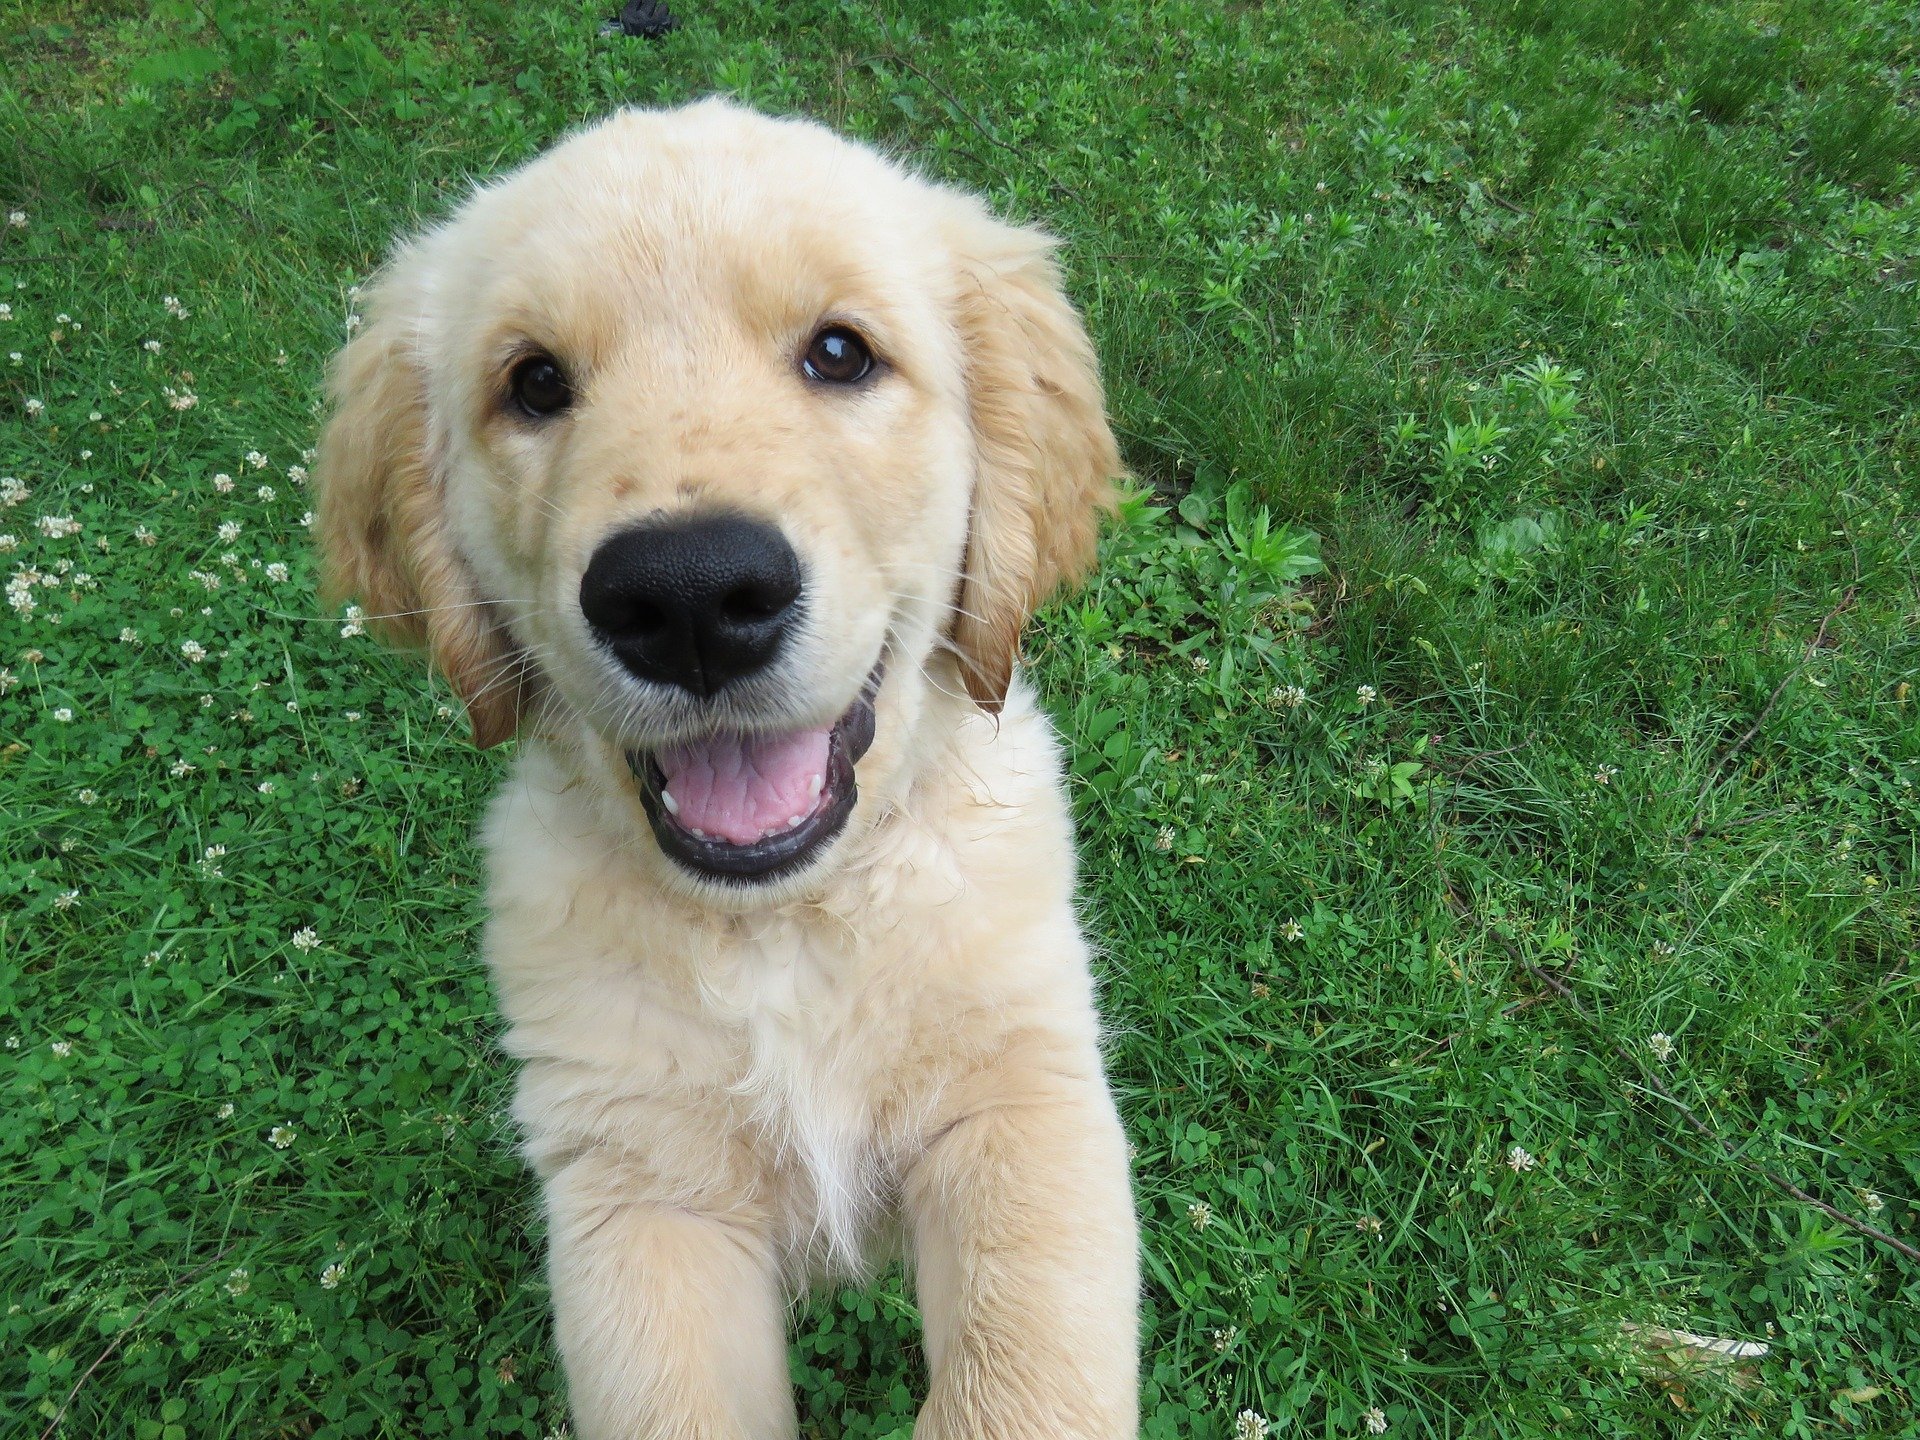 251 Top Golden Retriever Names Of 2020 Ranked By Popularity